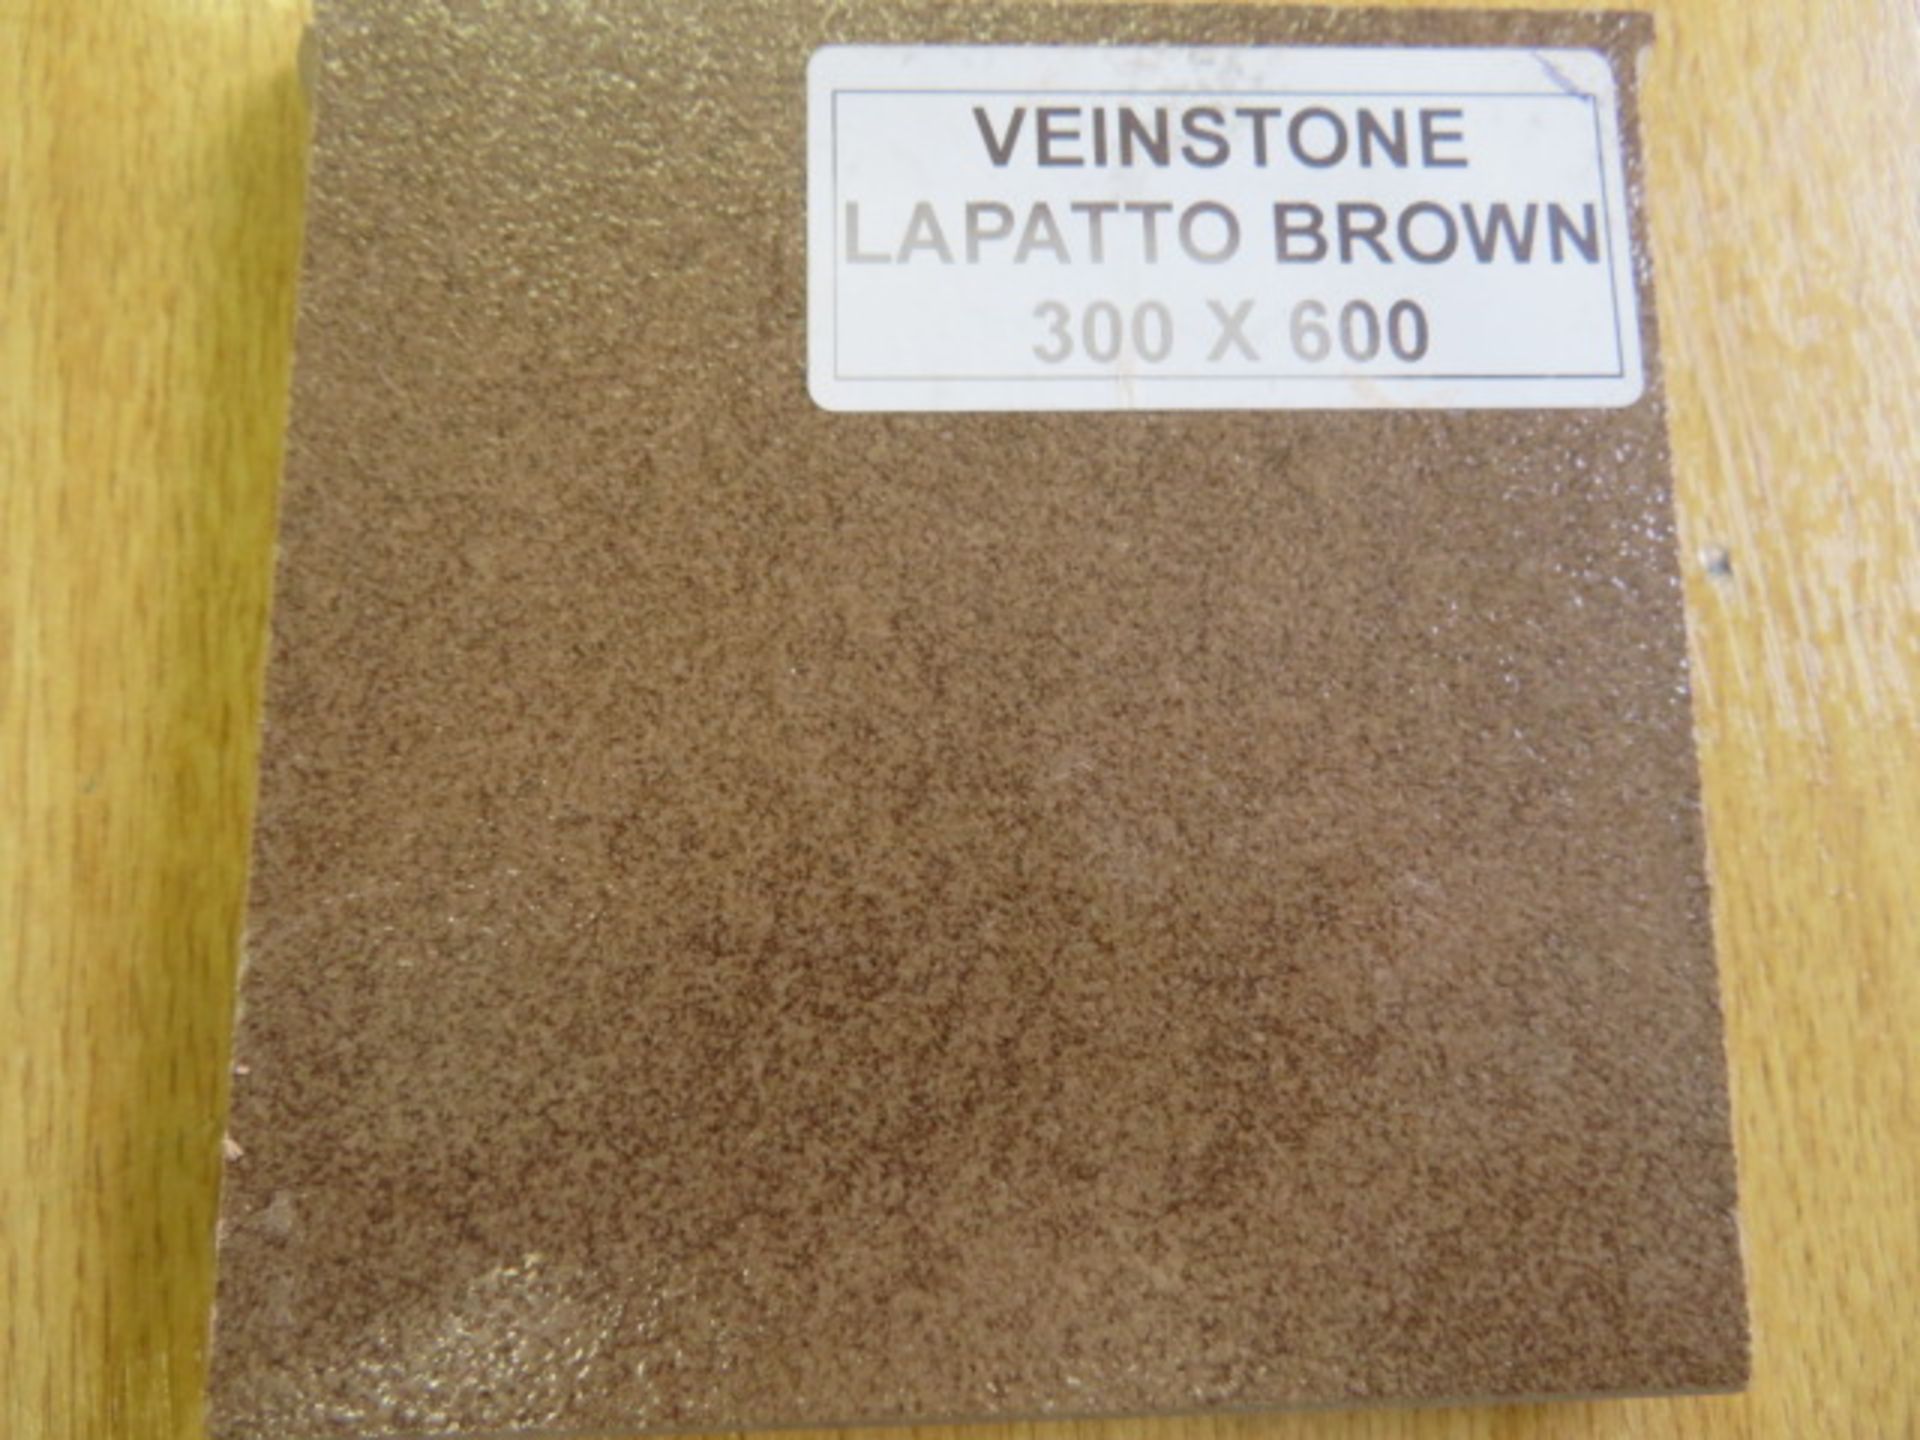 NEW 8.64 Square Meters of Veinstone Lapatto Brown Polished Wall and Floor Tiles. 300x600mm, 1.... - Image 2 of 3